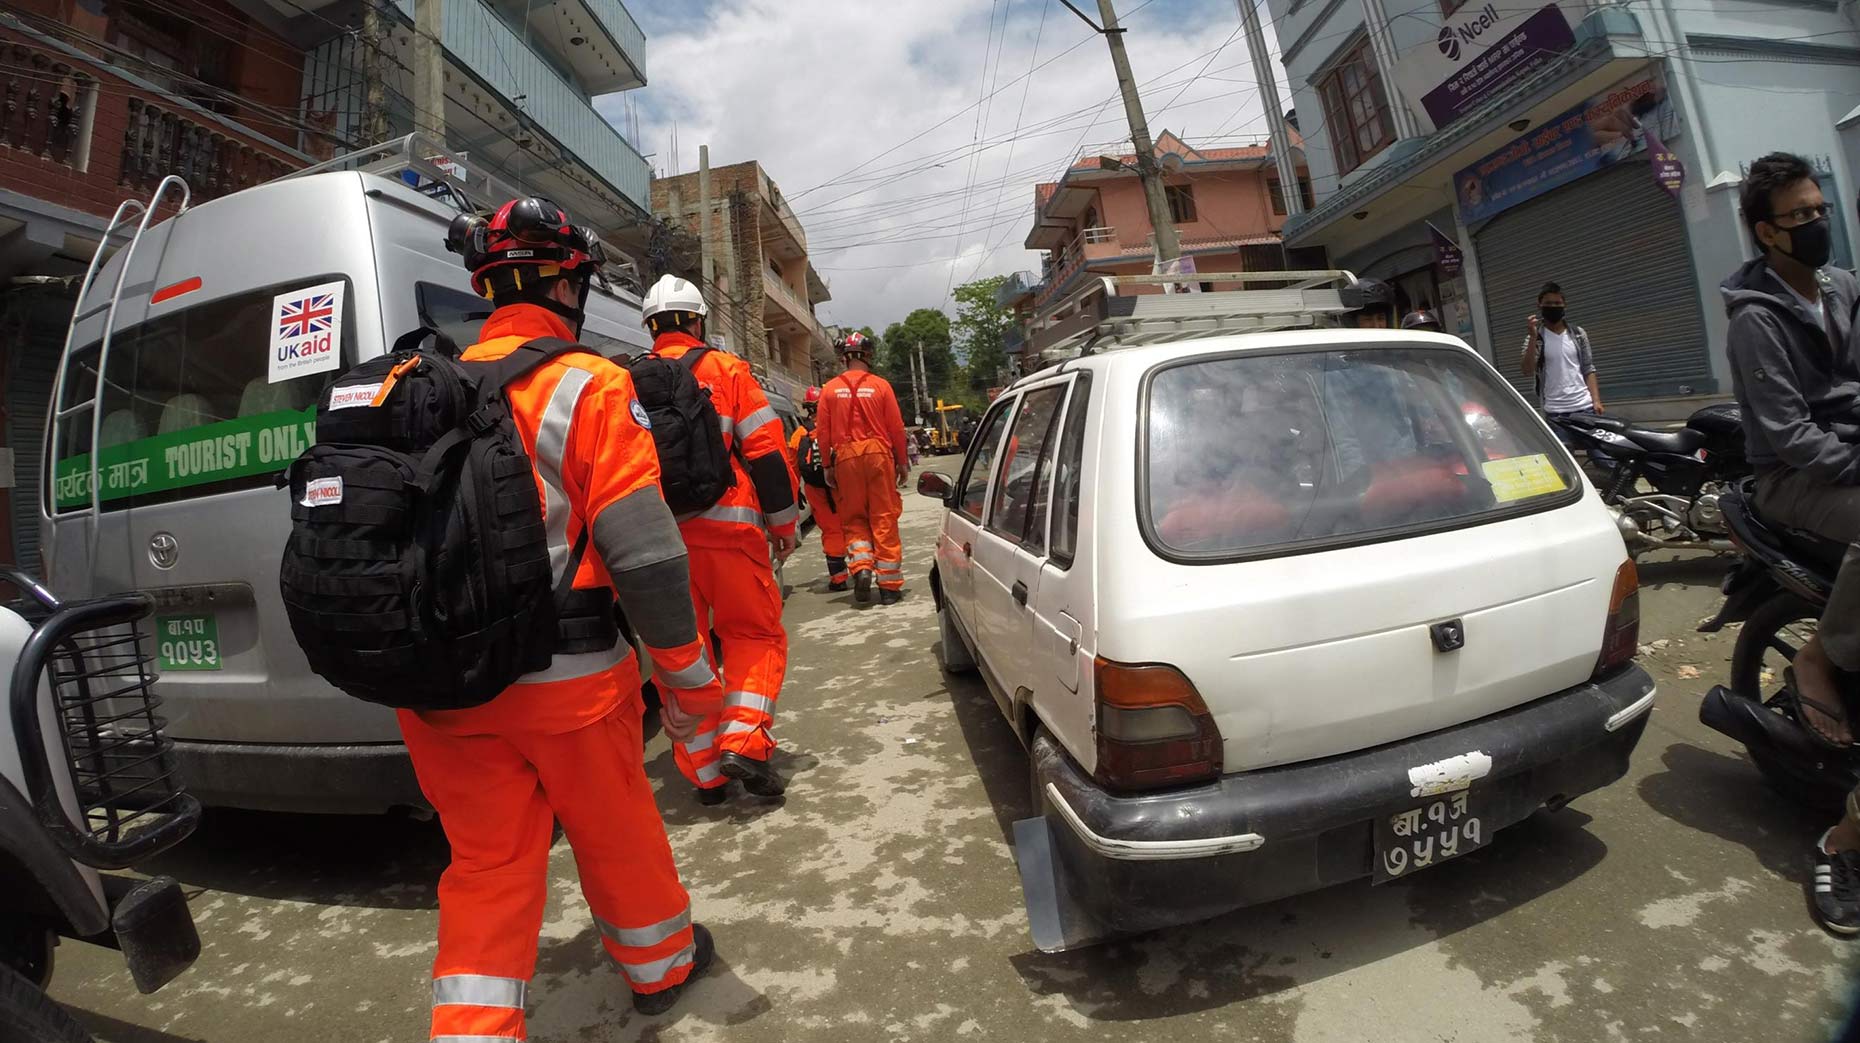 The team have now finished their work in Kathmandu and are beginning they search and rescue work in more rural suburbs. 